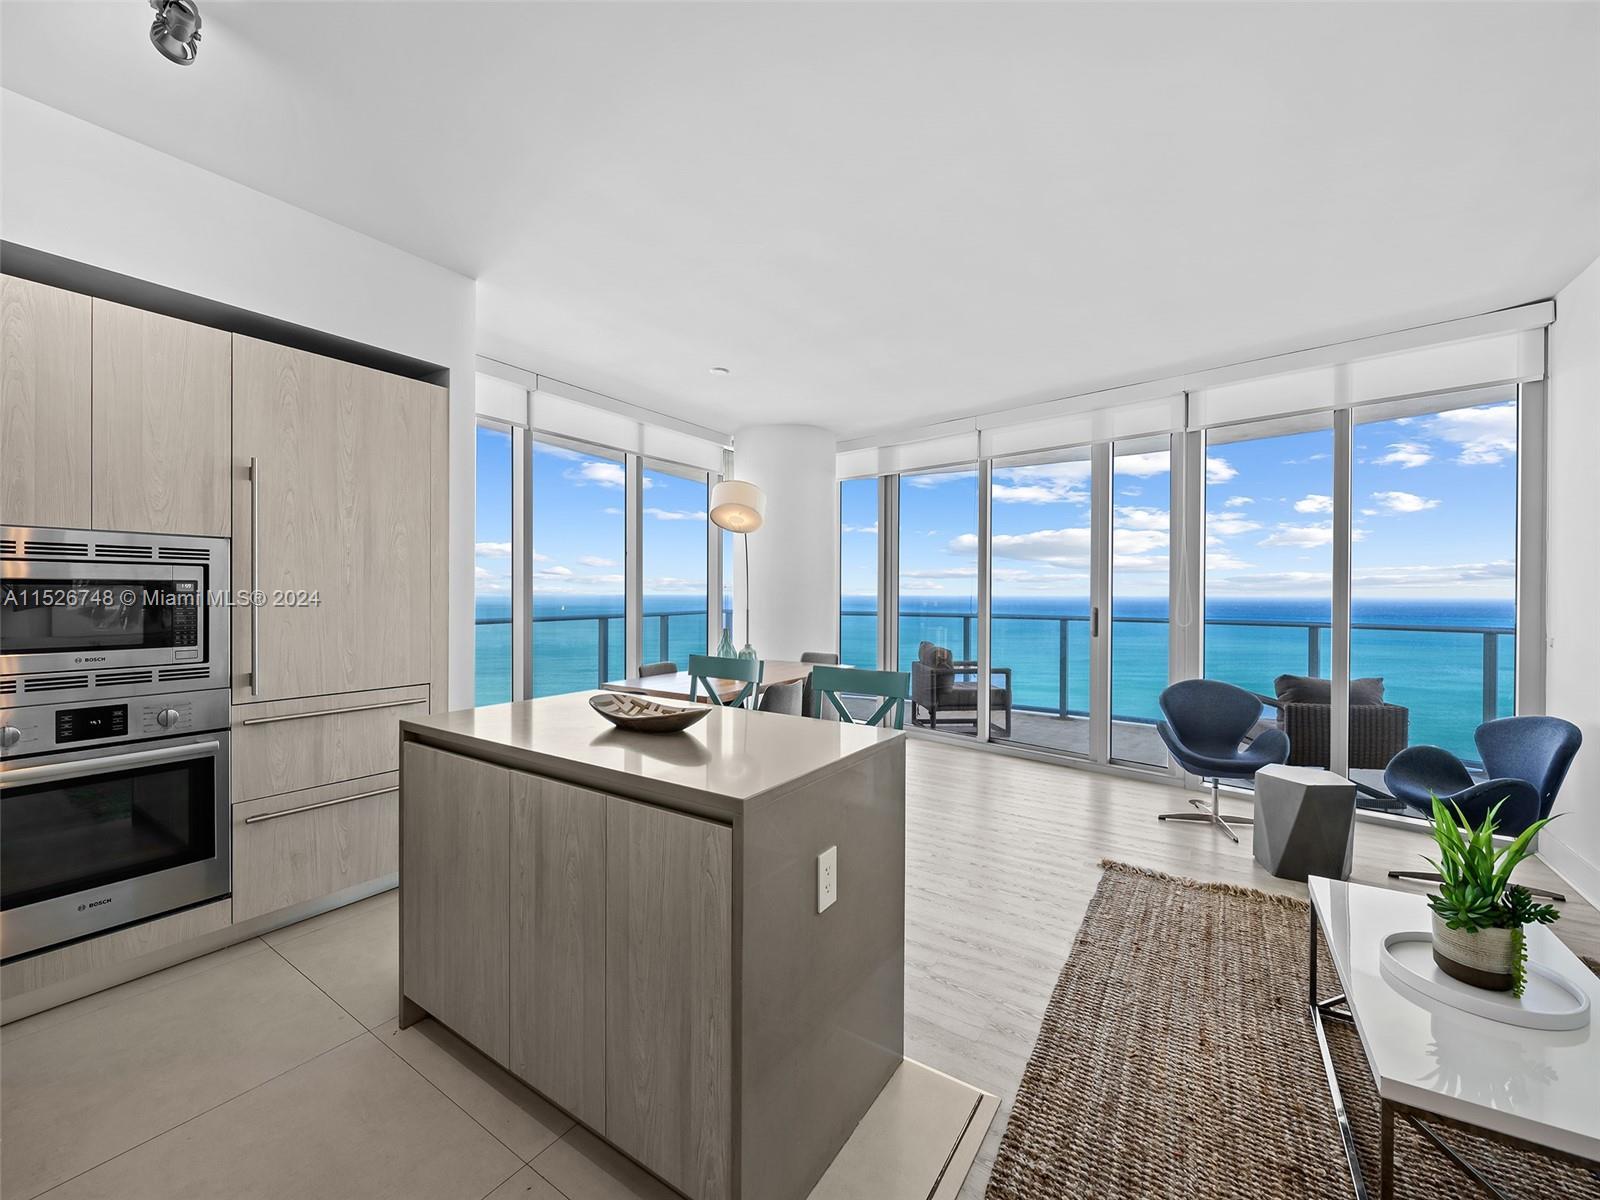 Photo of 4111 S Ocean Dr #3202 in Hollywood, FL